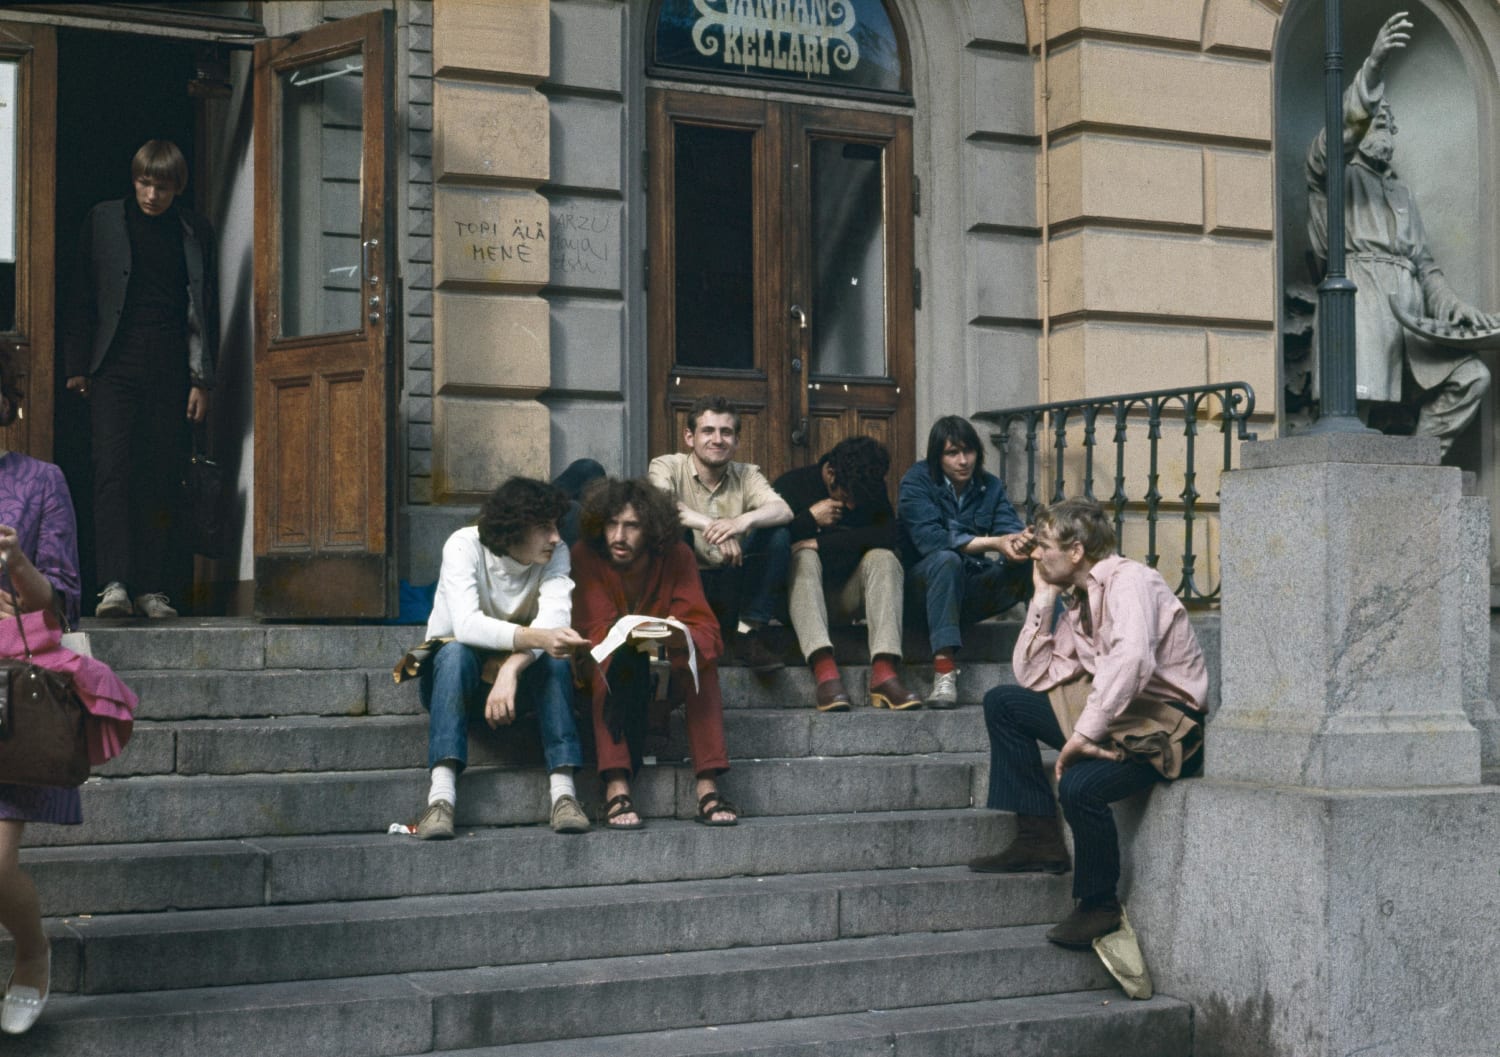 Youth hanging out on the stairs of the Old Student House, Helsinki ca. 1970